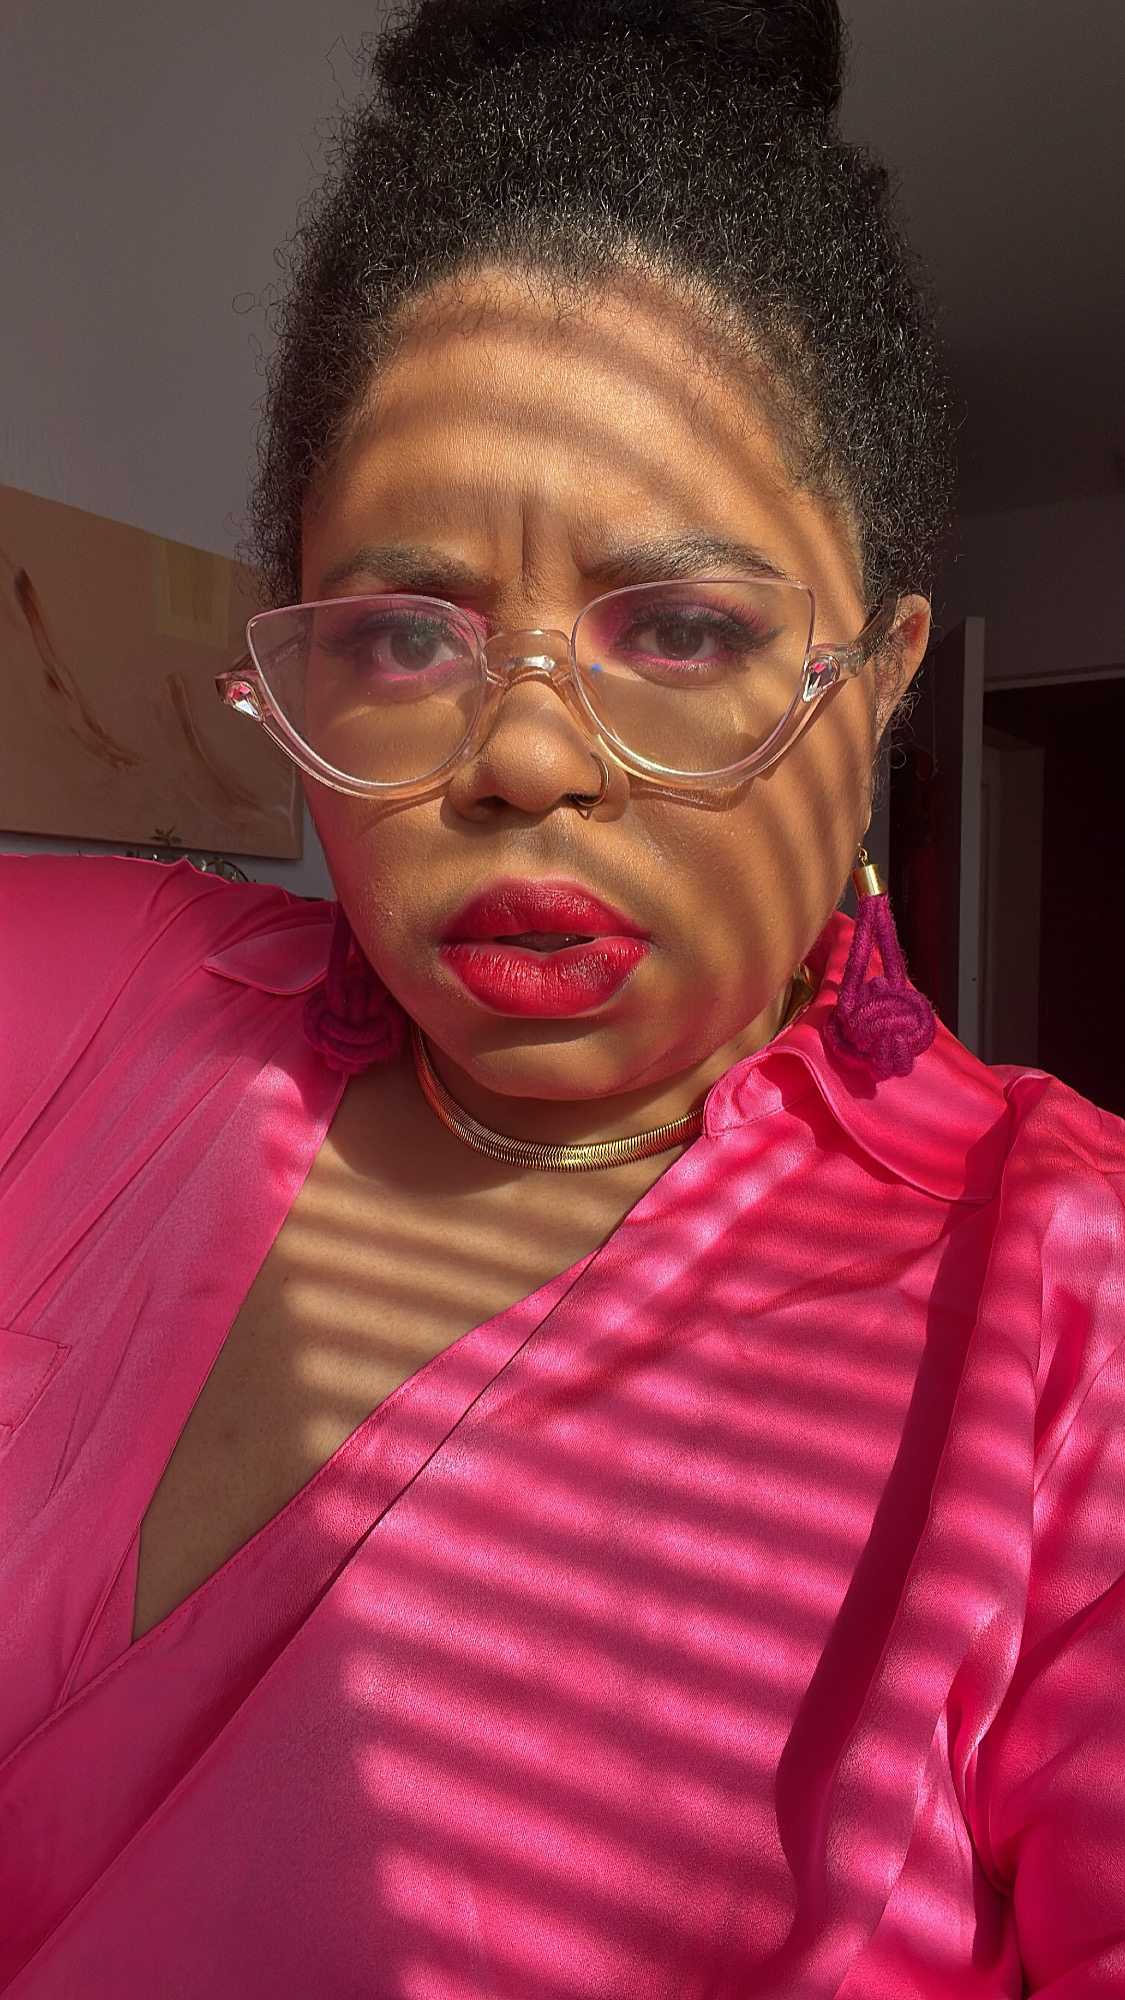 Dani is here in a pink outfit with matching eyeshadow, lipstick and glasses! Dani is a Black woman, her hair is up in a bun and she is wearing a golden necklace. Dappled sunlight from blinds washes over her.